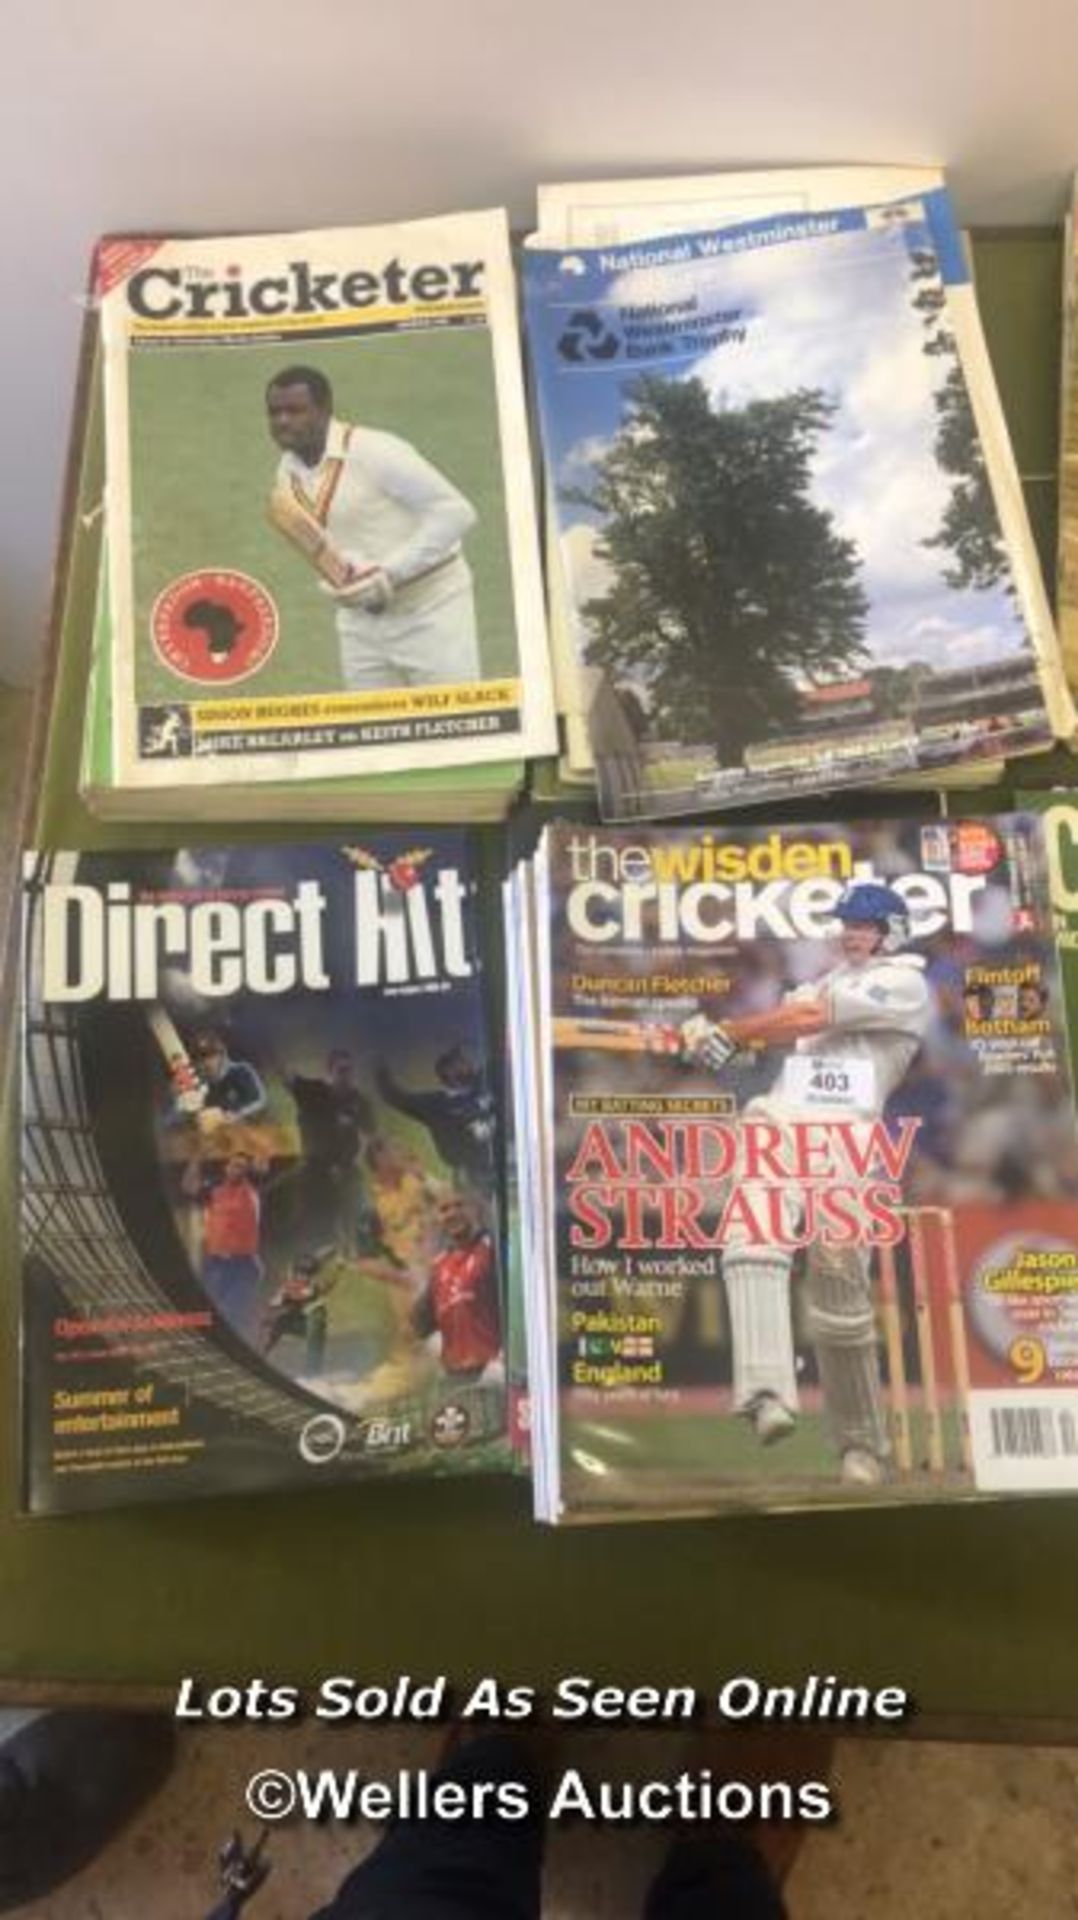 COLLECTION OF MAGAZINES, MAINLY 'THE CRICKETER' - Image 2 of 3